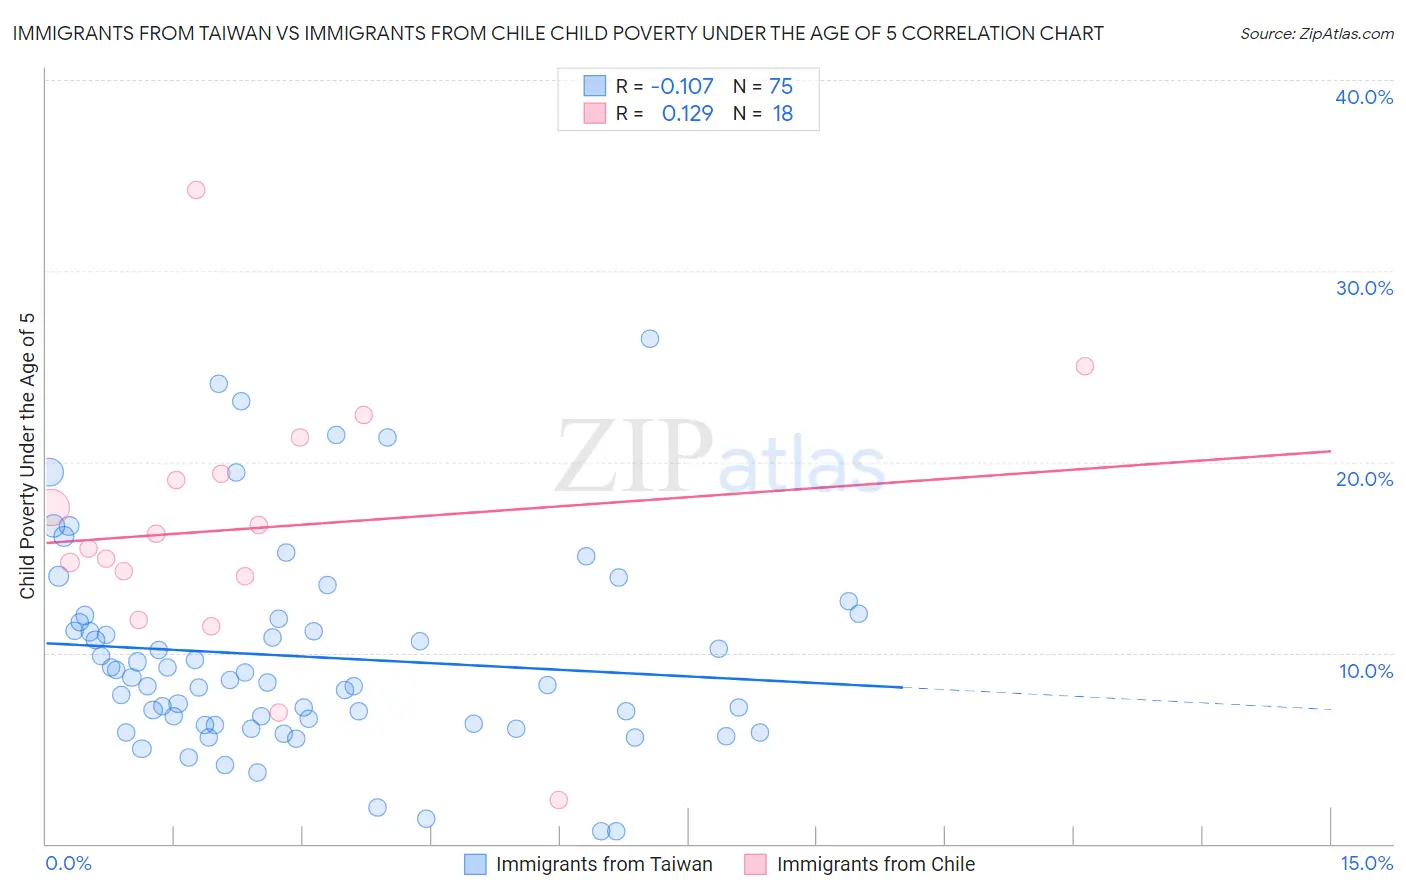 Immigrants from Taiwan vs Immigrants from Chile Child Poverty Under the Age of 5